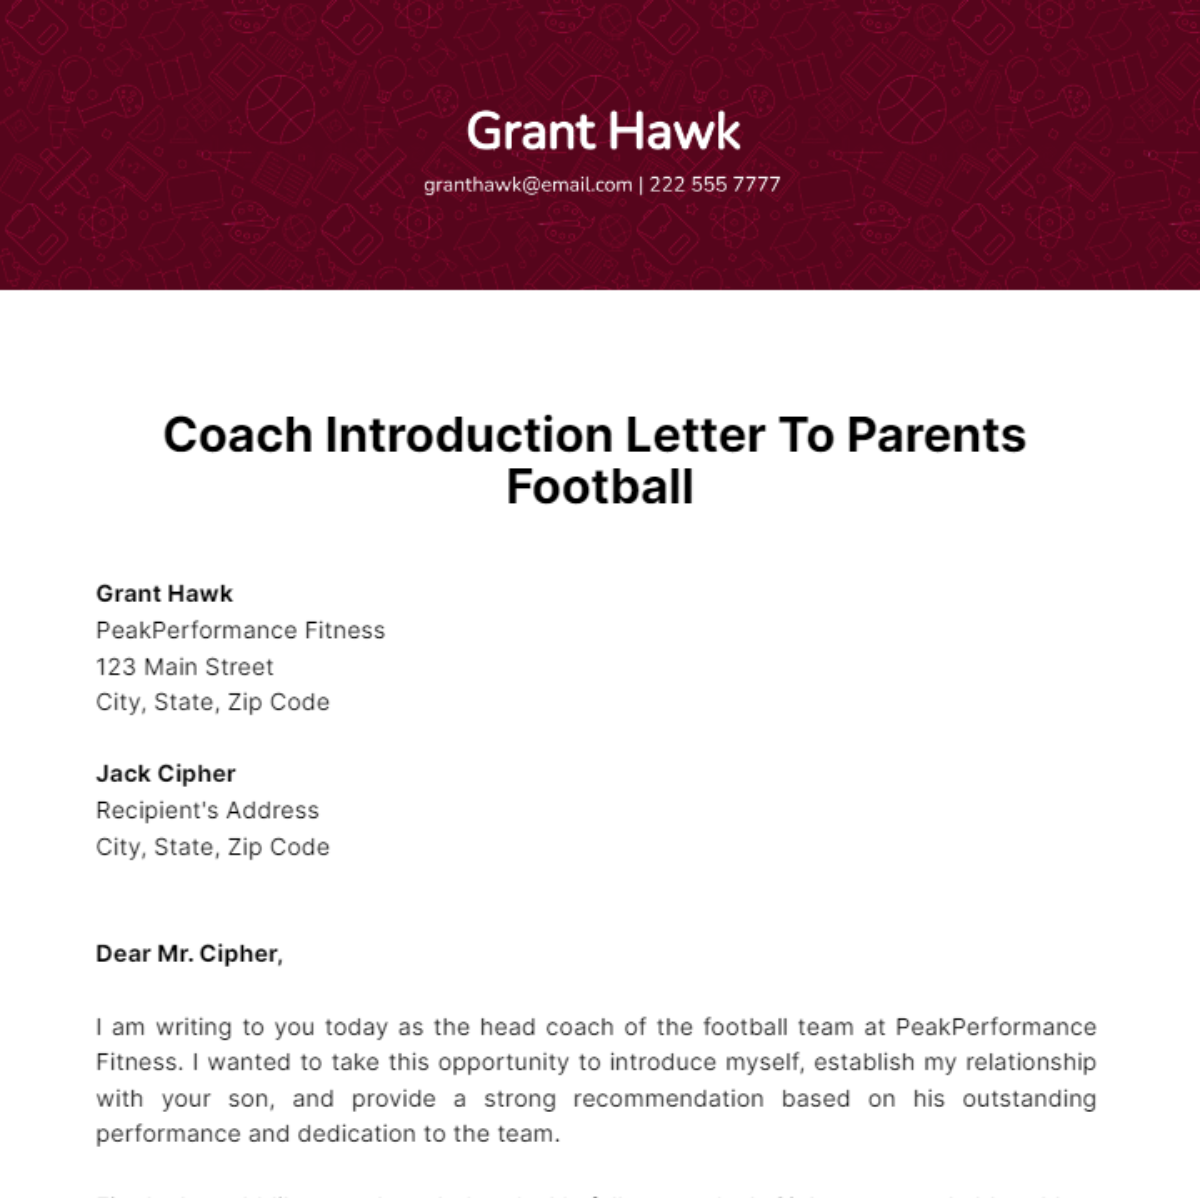 Coach Introduction Letter To Parents Football Template